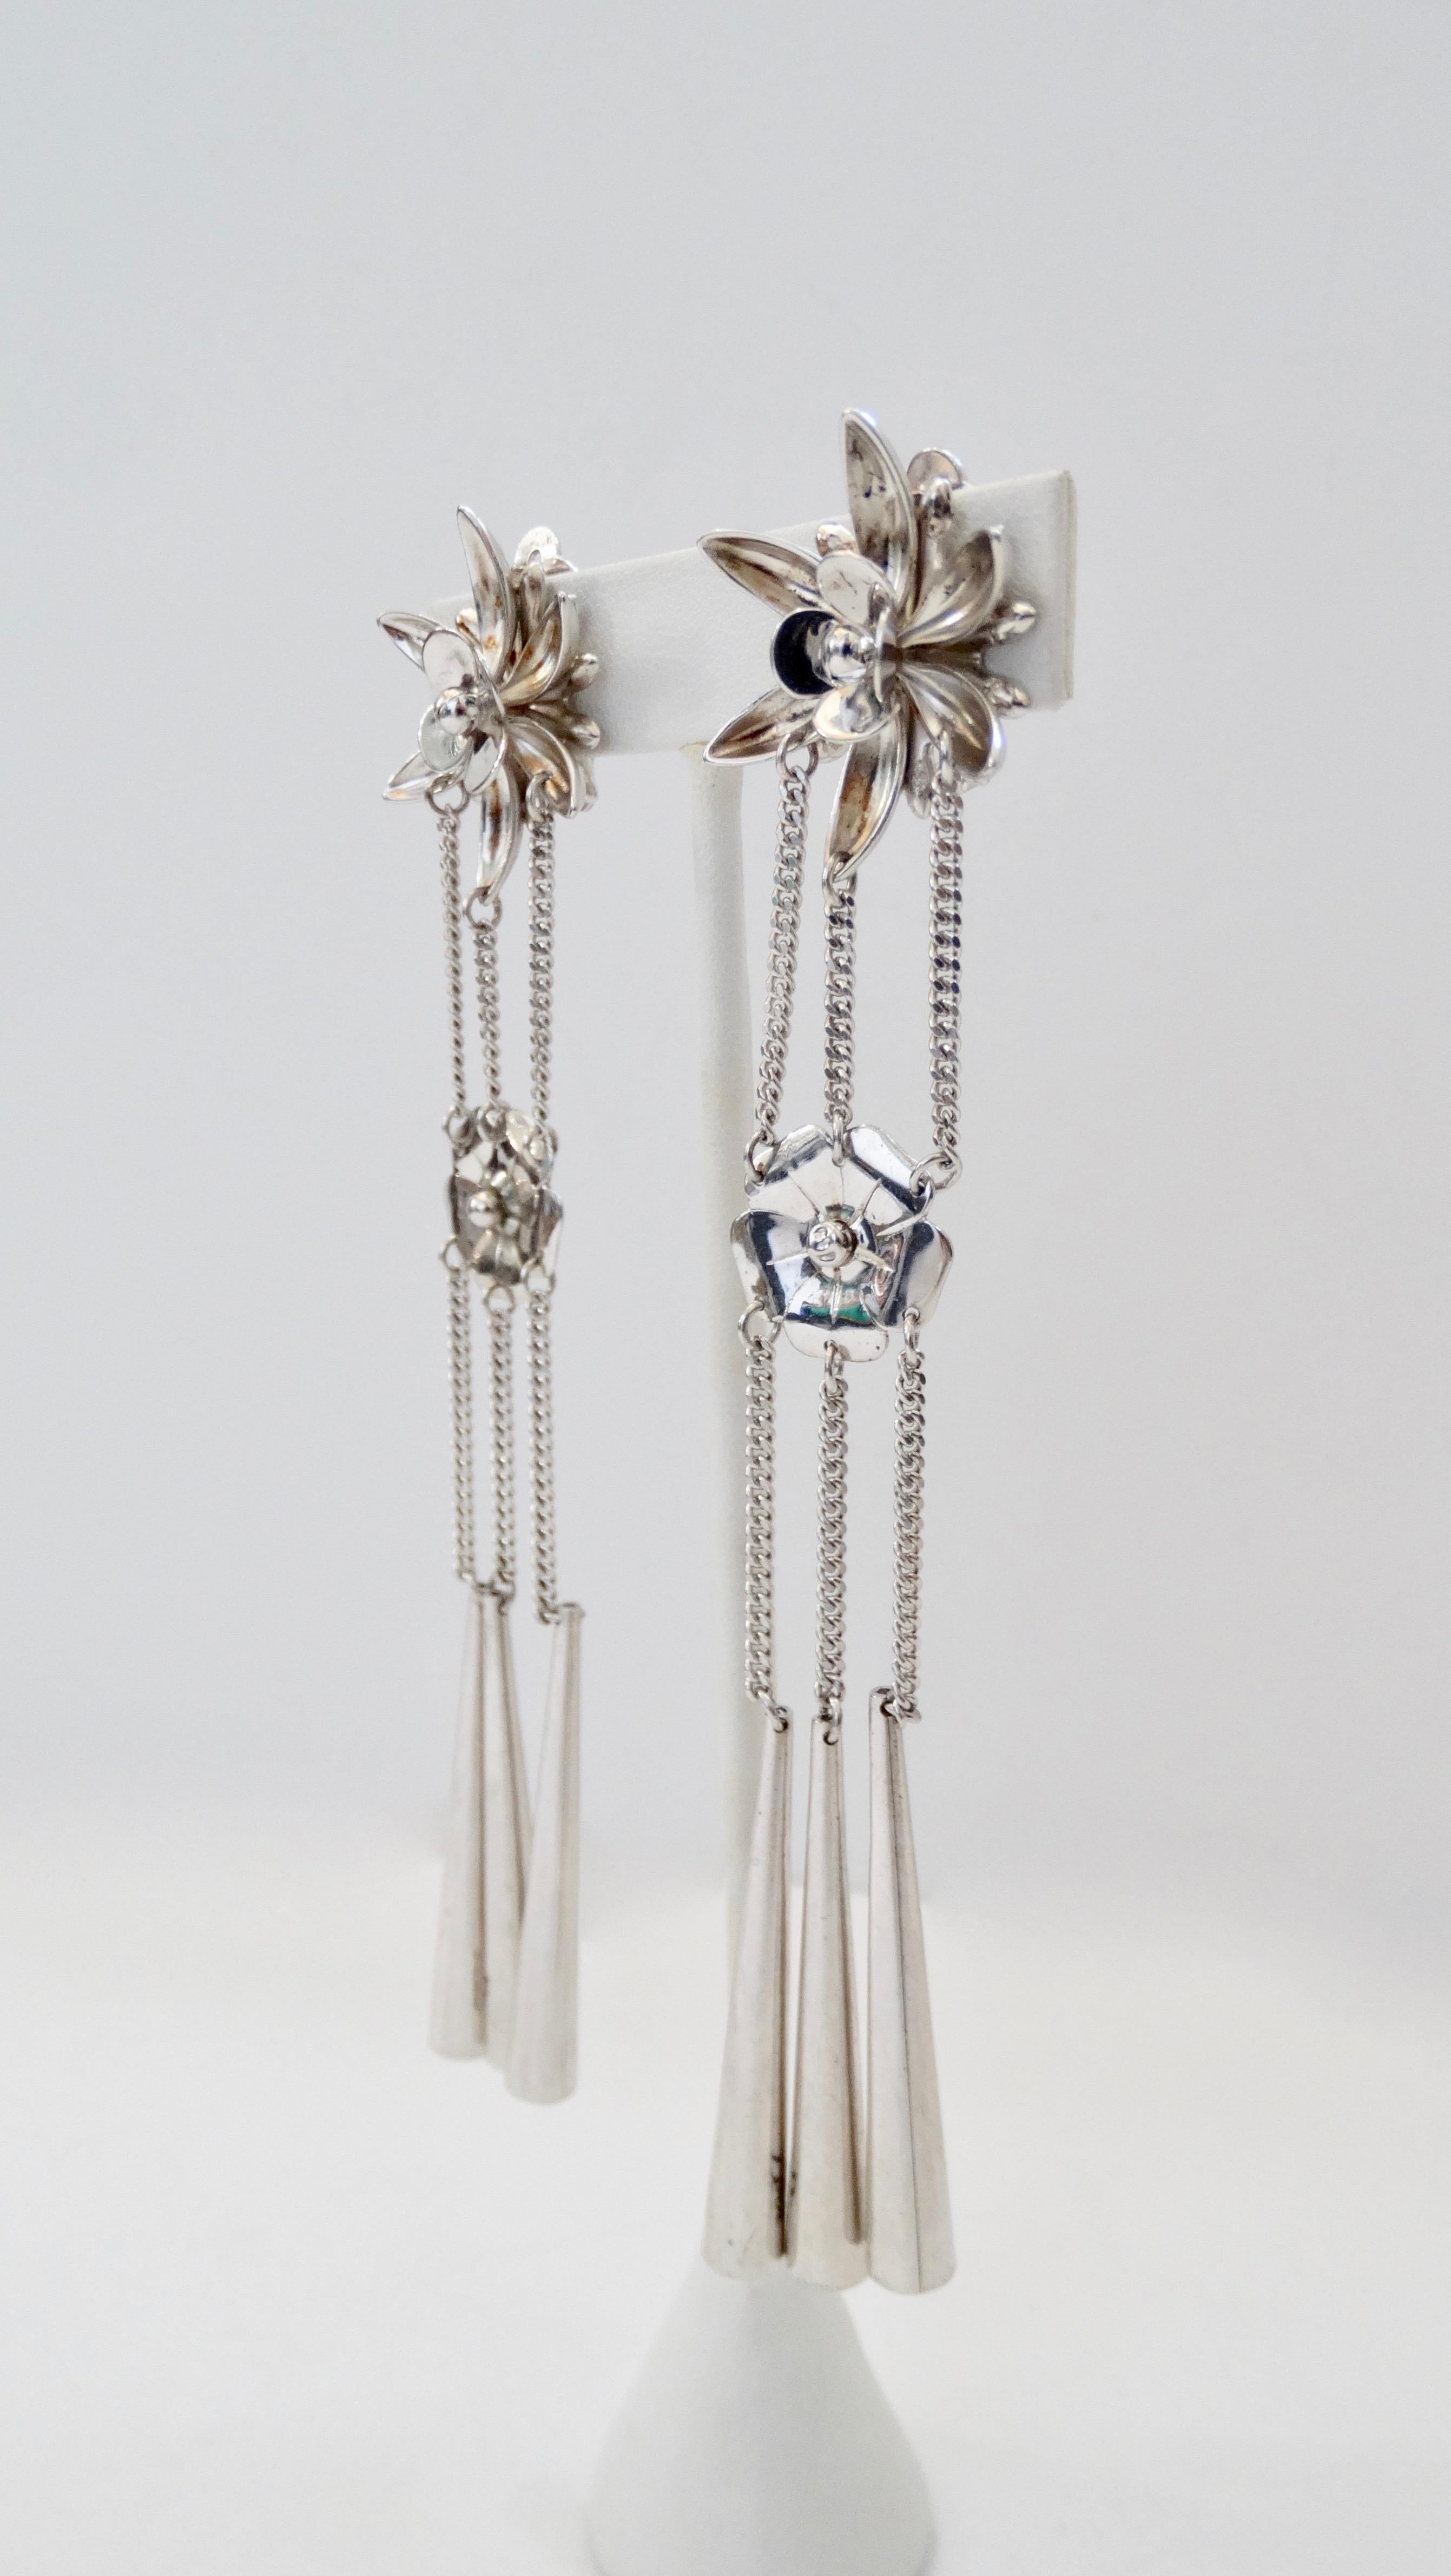 Show off some eye candy with these works of art by John Galliano for Dior! Circa 2003/2004 from their Fall/Winter collection, these earrings highlight influences from the Chinese and Japanese culture. Crafted from Silver and adorned with a gorgeous